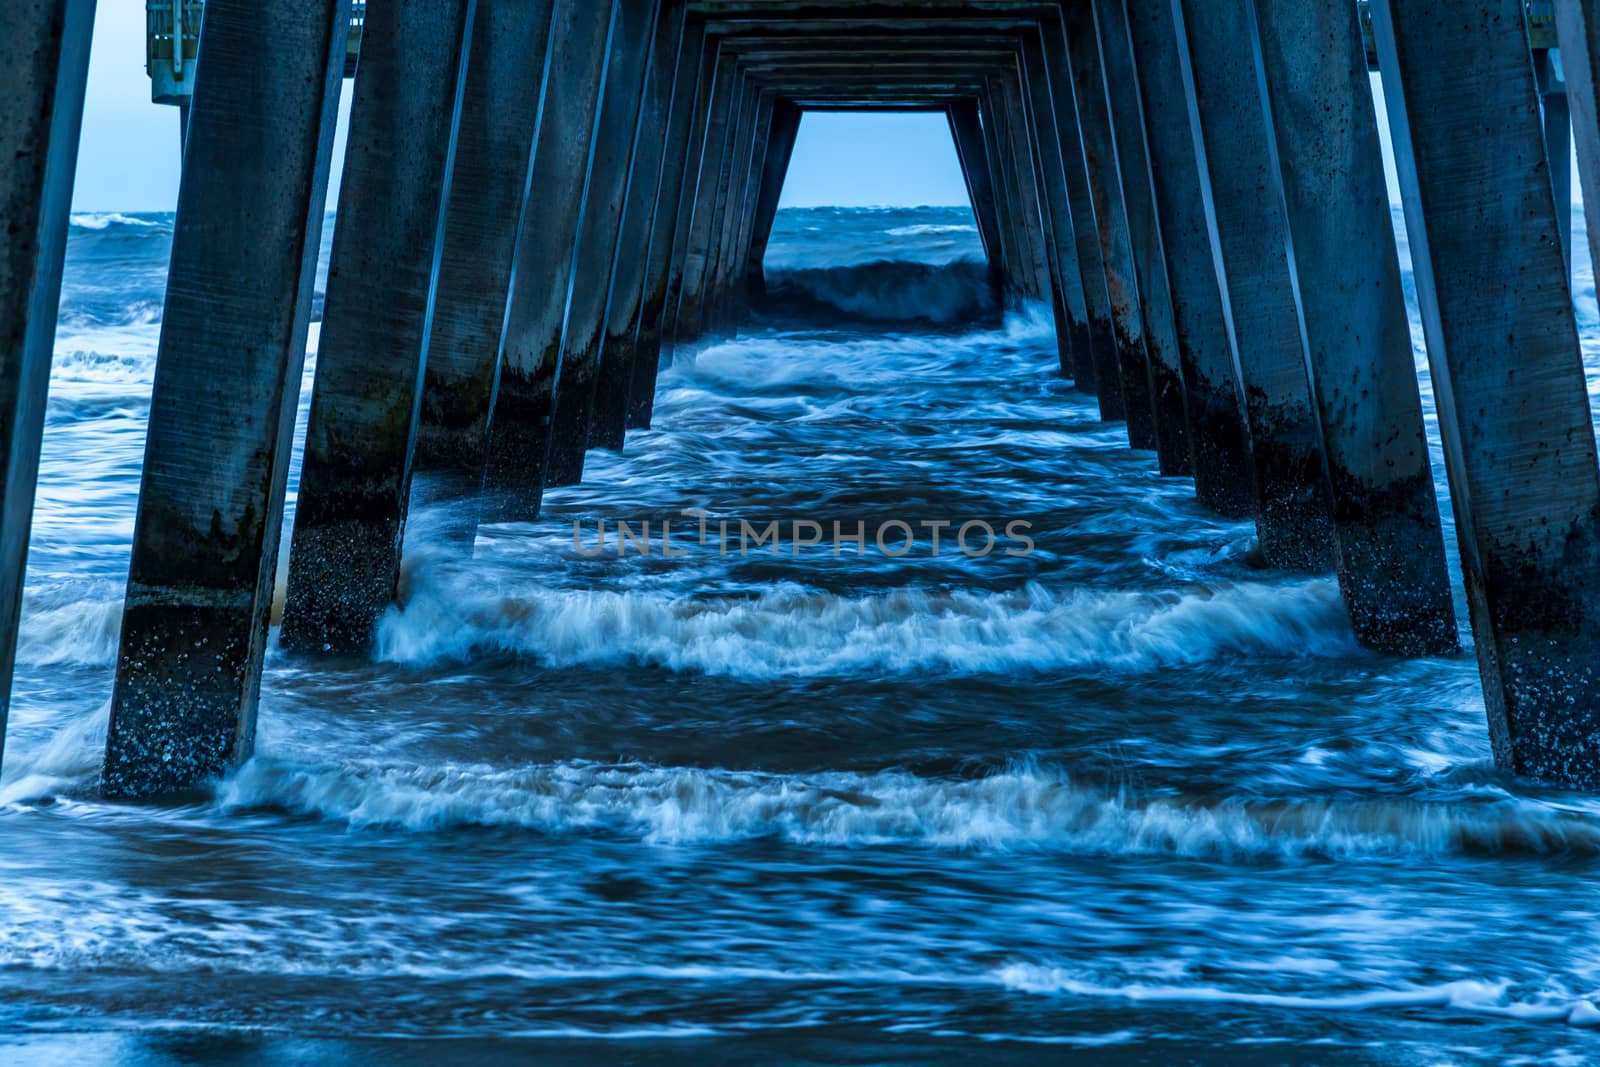 A stormy morning crashes ocean waves against the pier at Tybee Island, Georgia.